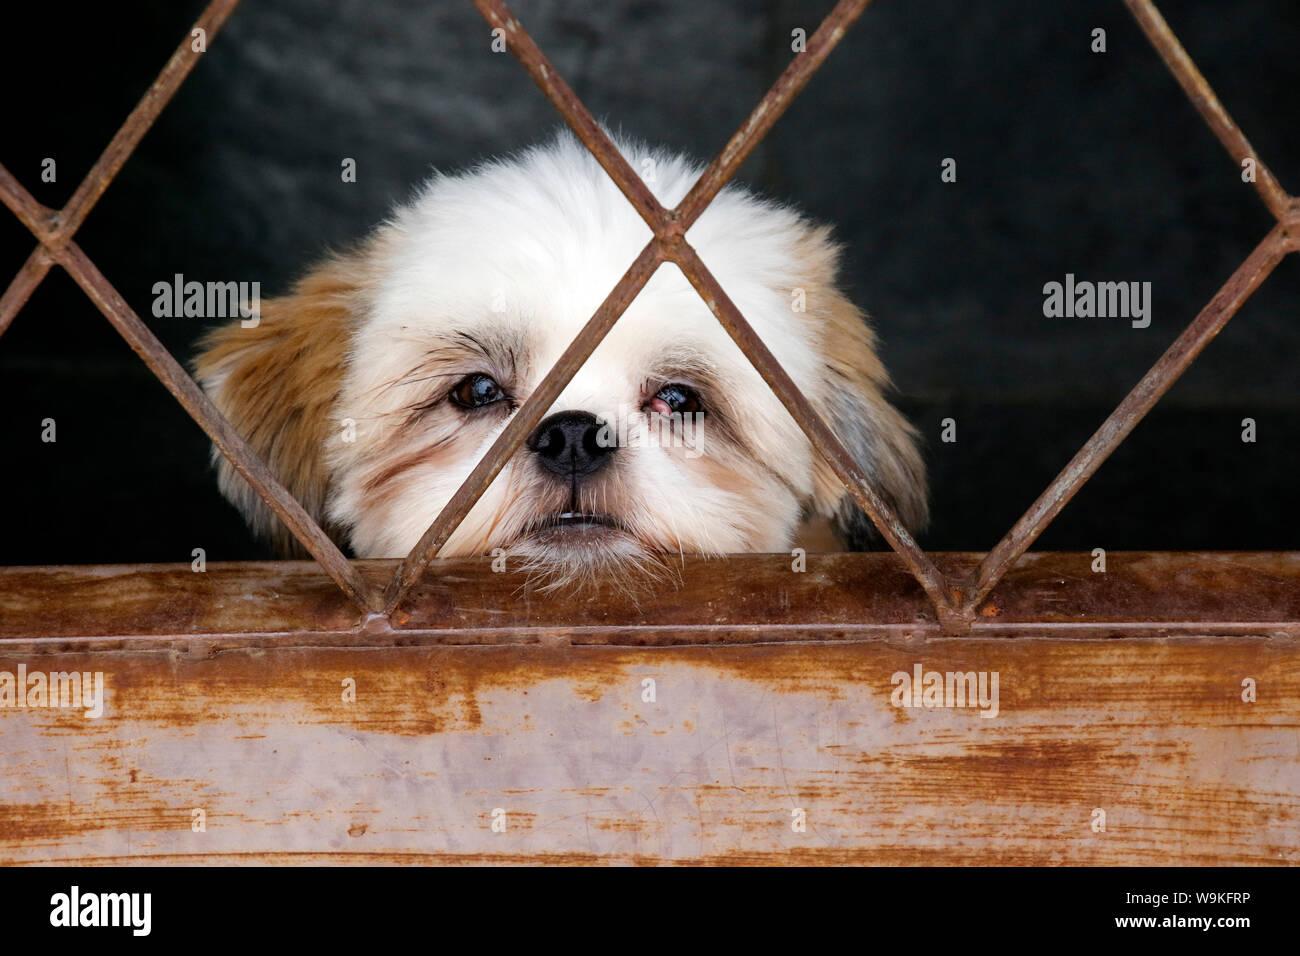 https://c8.alamy.com/comp/W9KFRP/little-sad-shih-tzu-puppy-looking-at-camera-young-puppy-dog-looking-from-the-door-W9KFRP.jpg